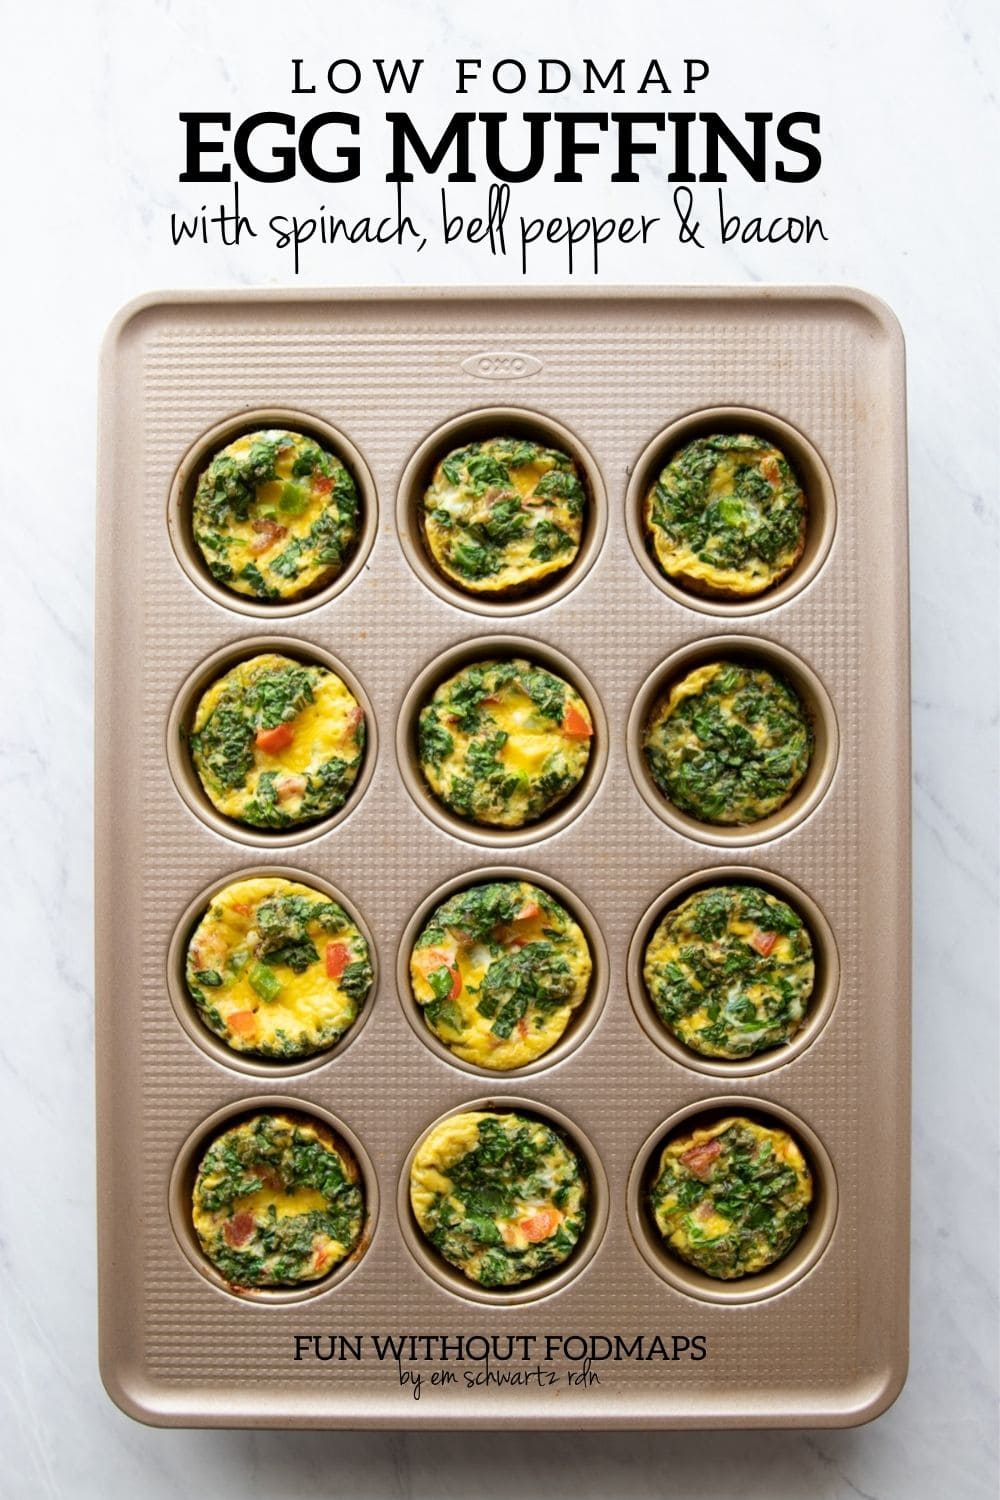 A muffin tin filled with veggie-filled egg muffins. In the white space above, black text reads "Low fODMAP Egg Muffins with Spinach, Bell Peppers & Bacon."